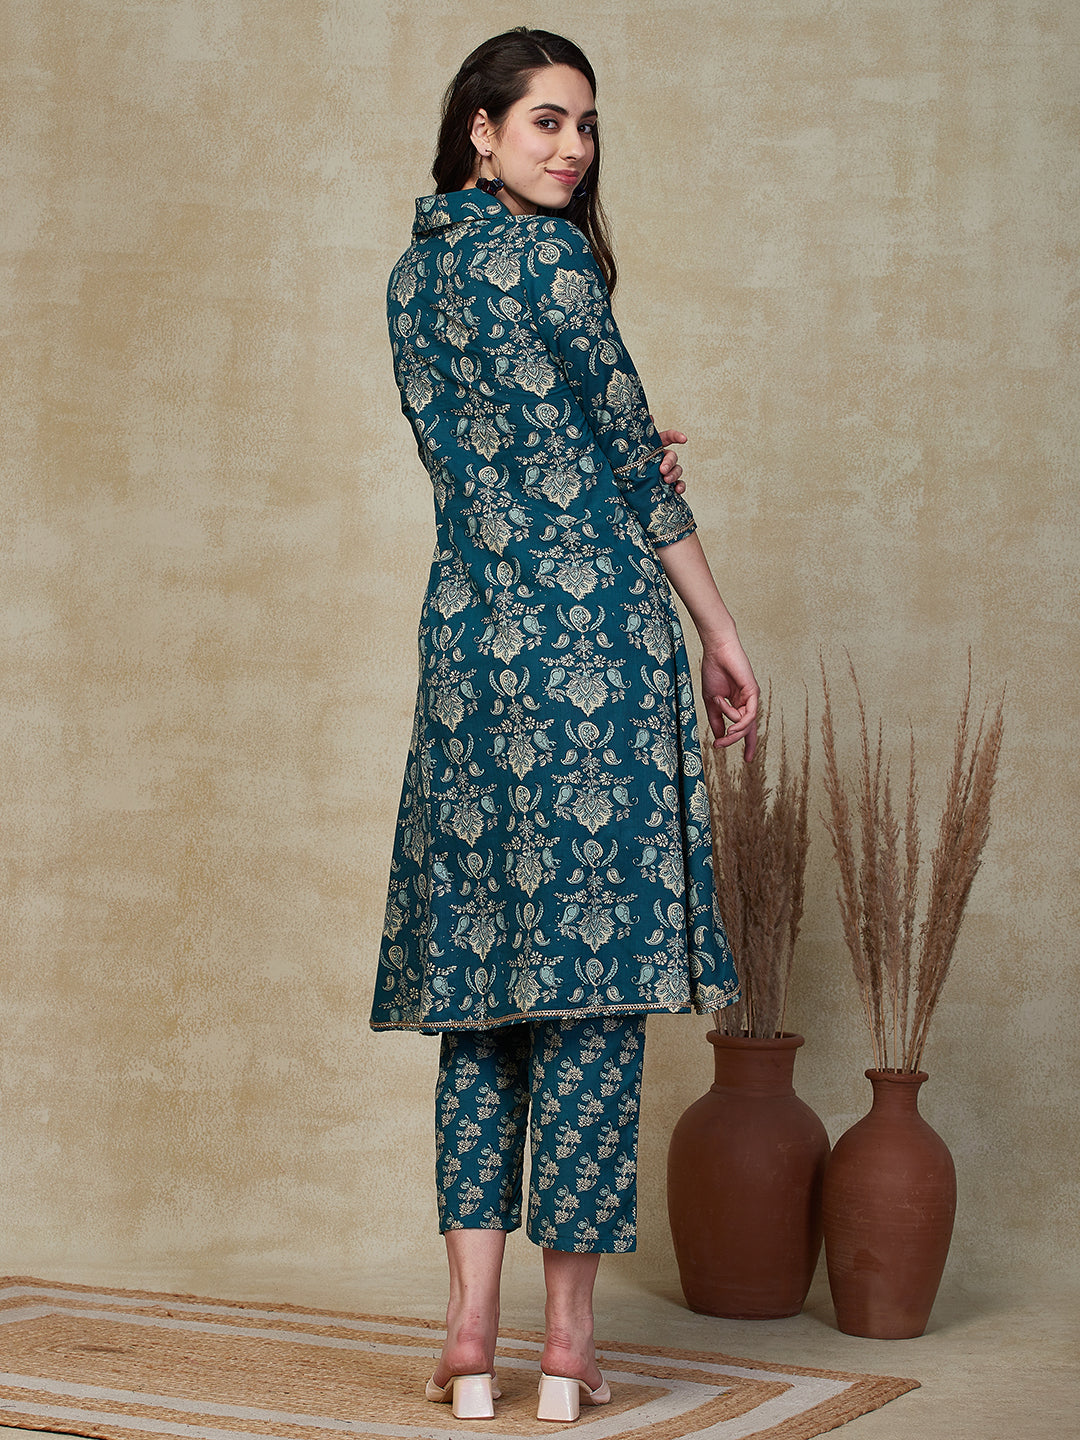 Floral Block Printed Zari Lace Embellished A-line Kurta with Pants - Blue